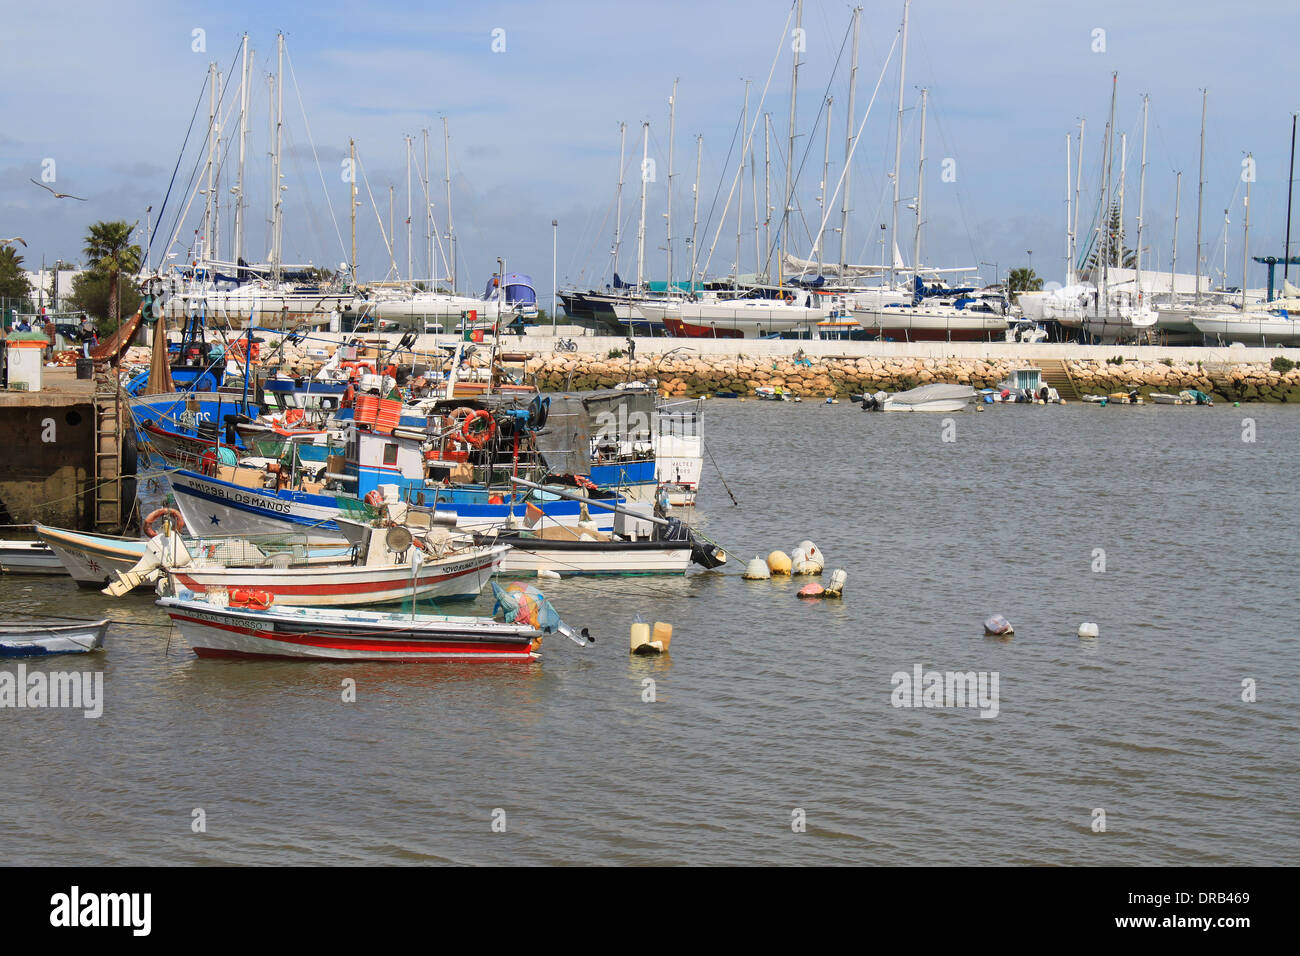 LAGOS,PORTUGAL,MARCH 21,2013: Motorboats and sailboats docked in the marina of Lagos, Algarve, Portugal, on March 21, 2013 Stock Photo